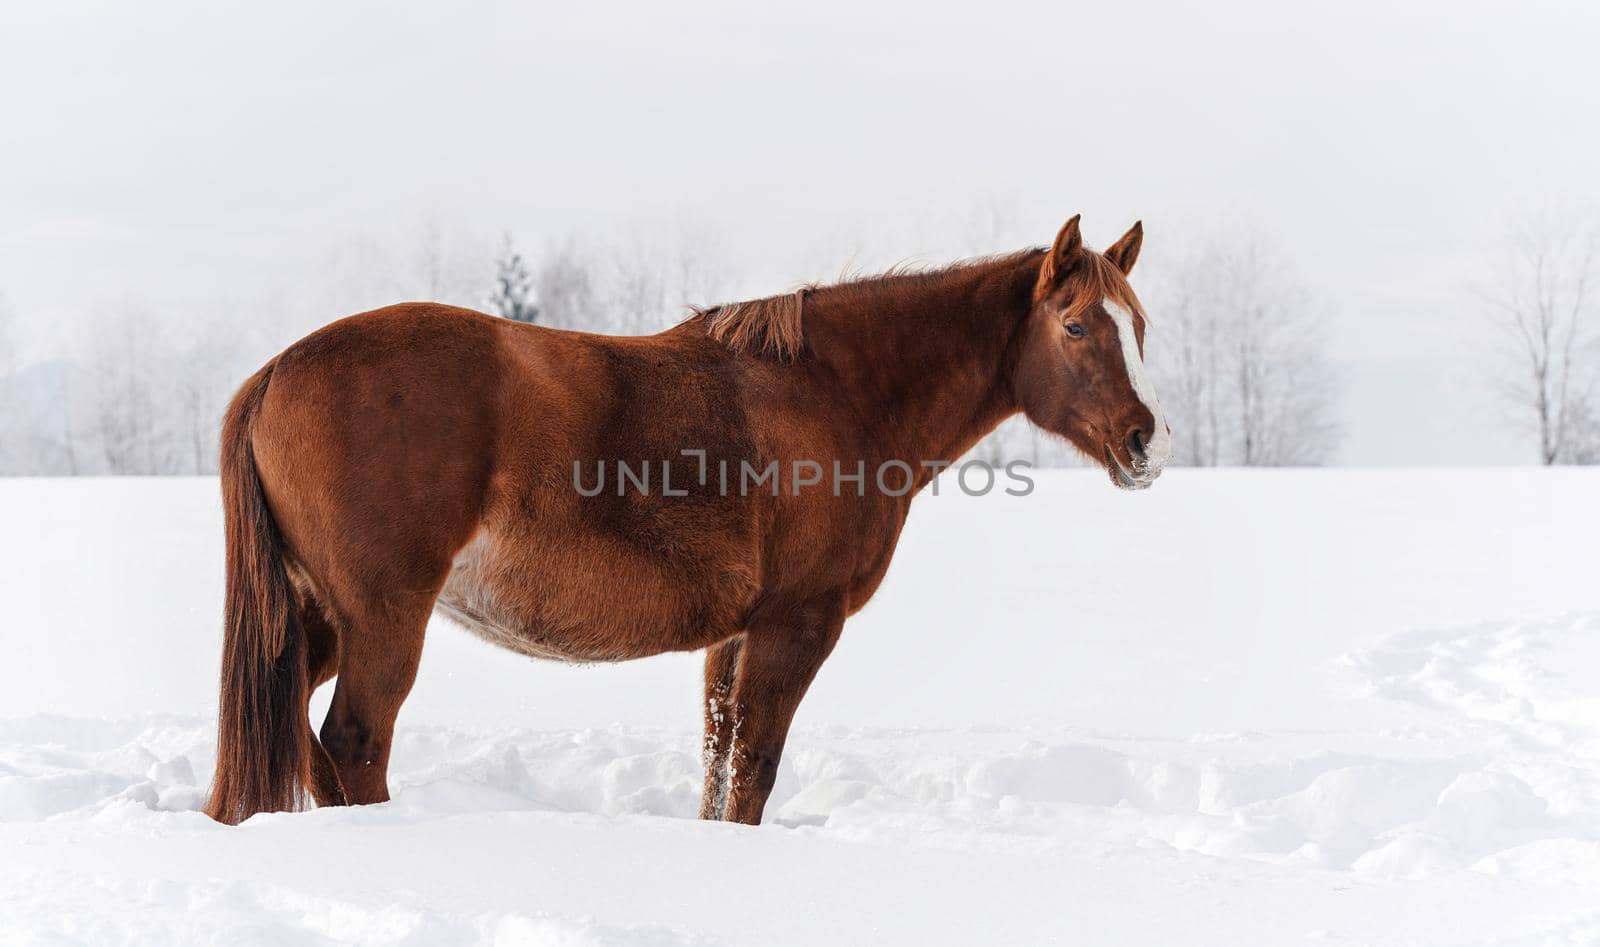 Brown horse standing on winter snow covered field, view from side by Ivanko